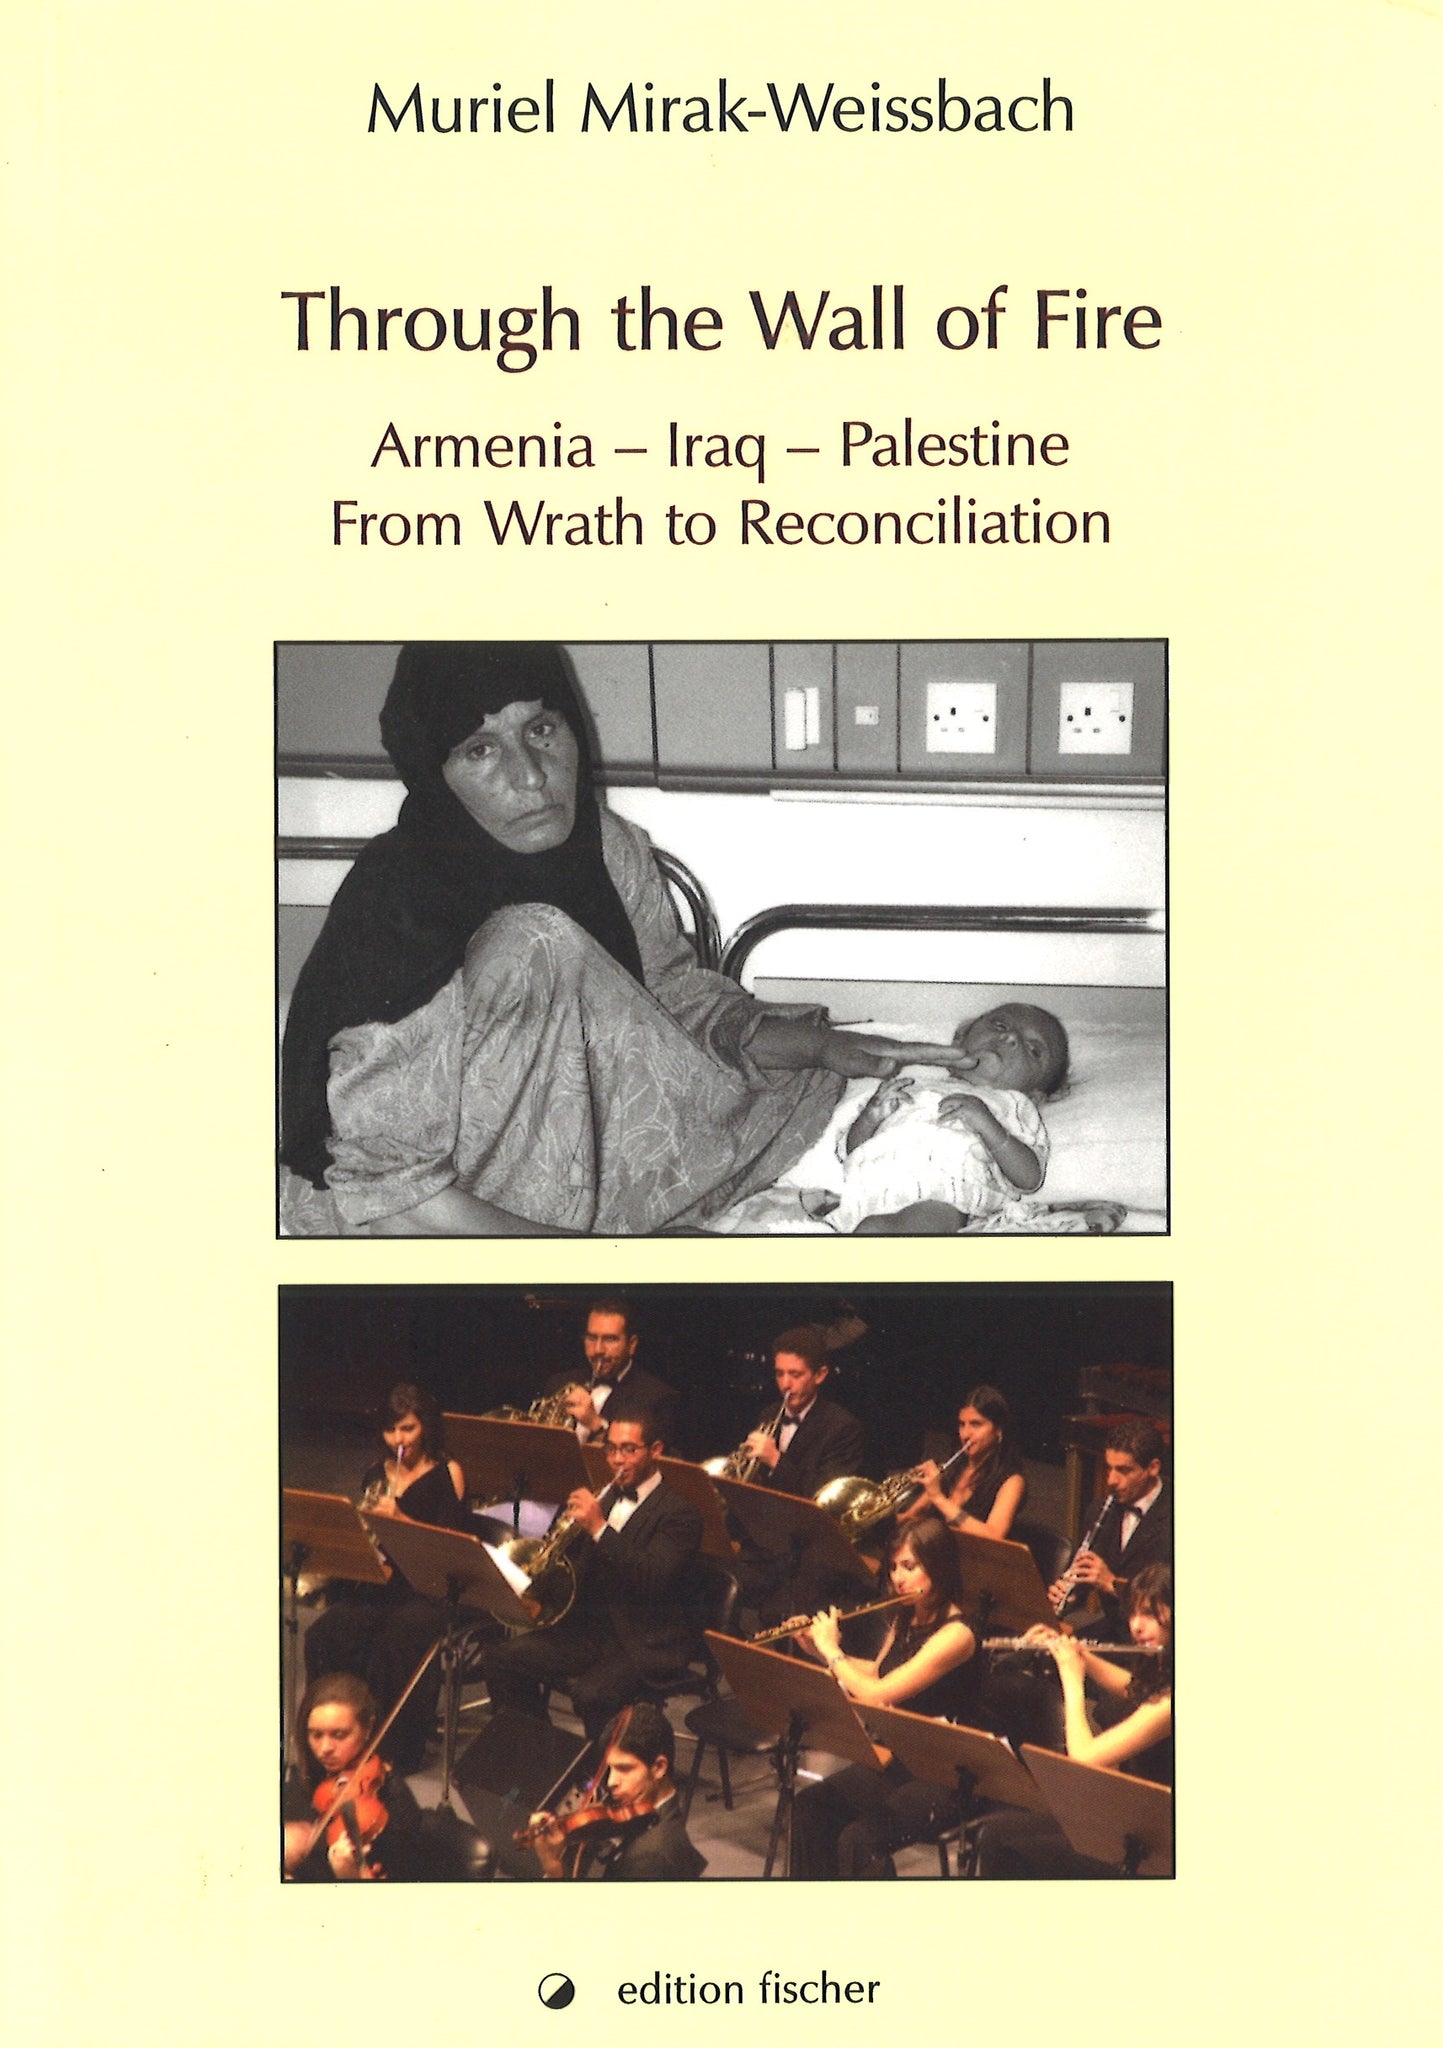 THROUGH THE WALL OF FIRE - Armenia - Iraq - Palestine: From Wrath to Reconciliation